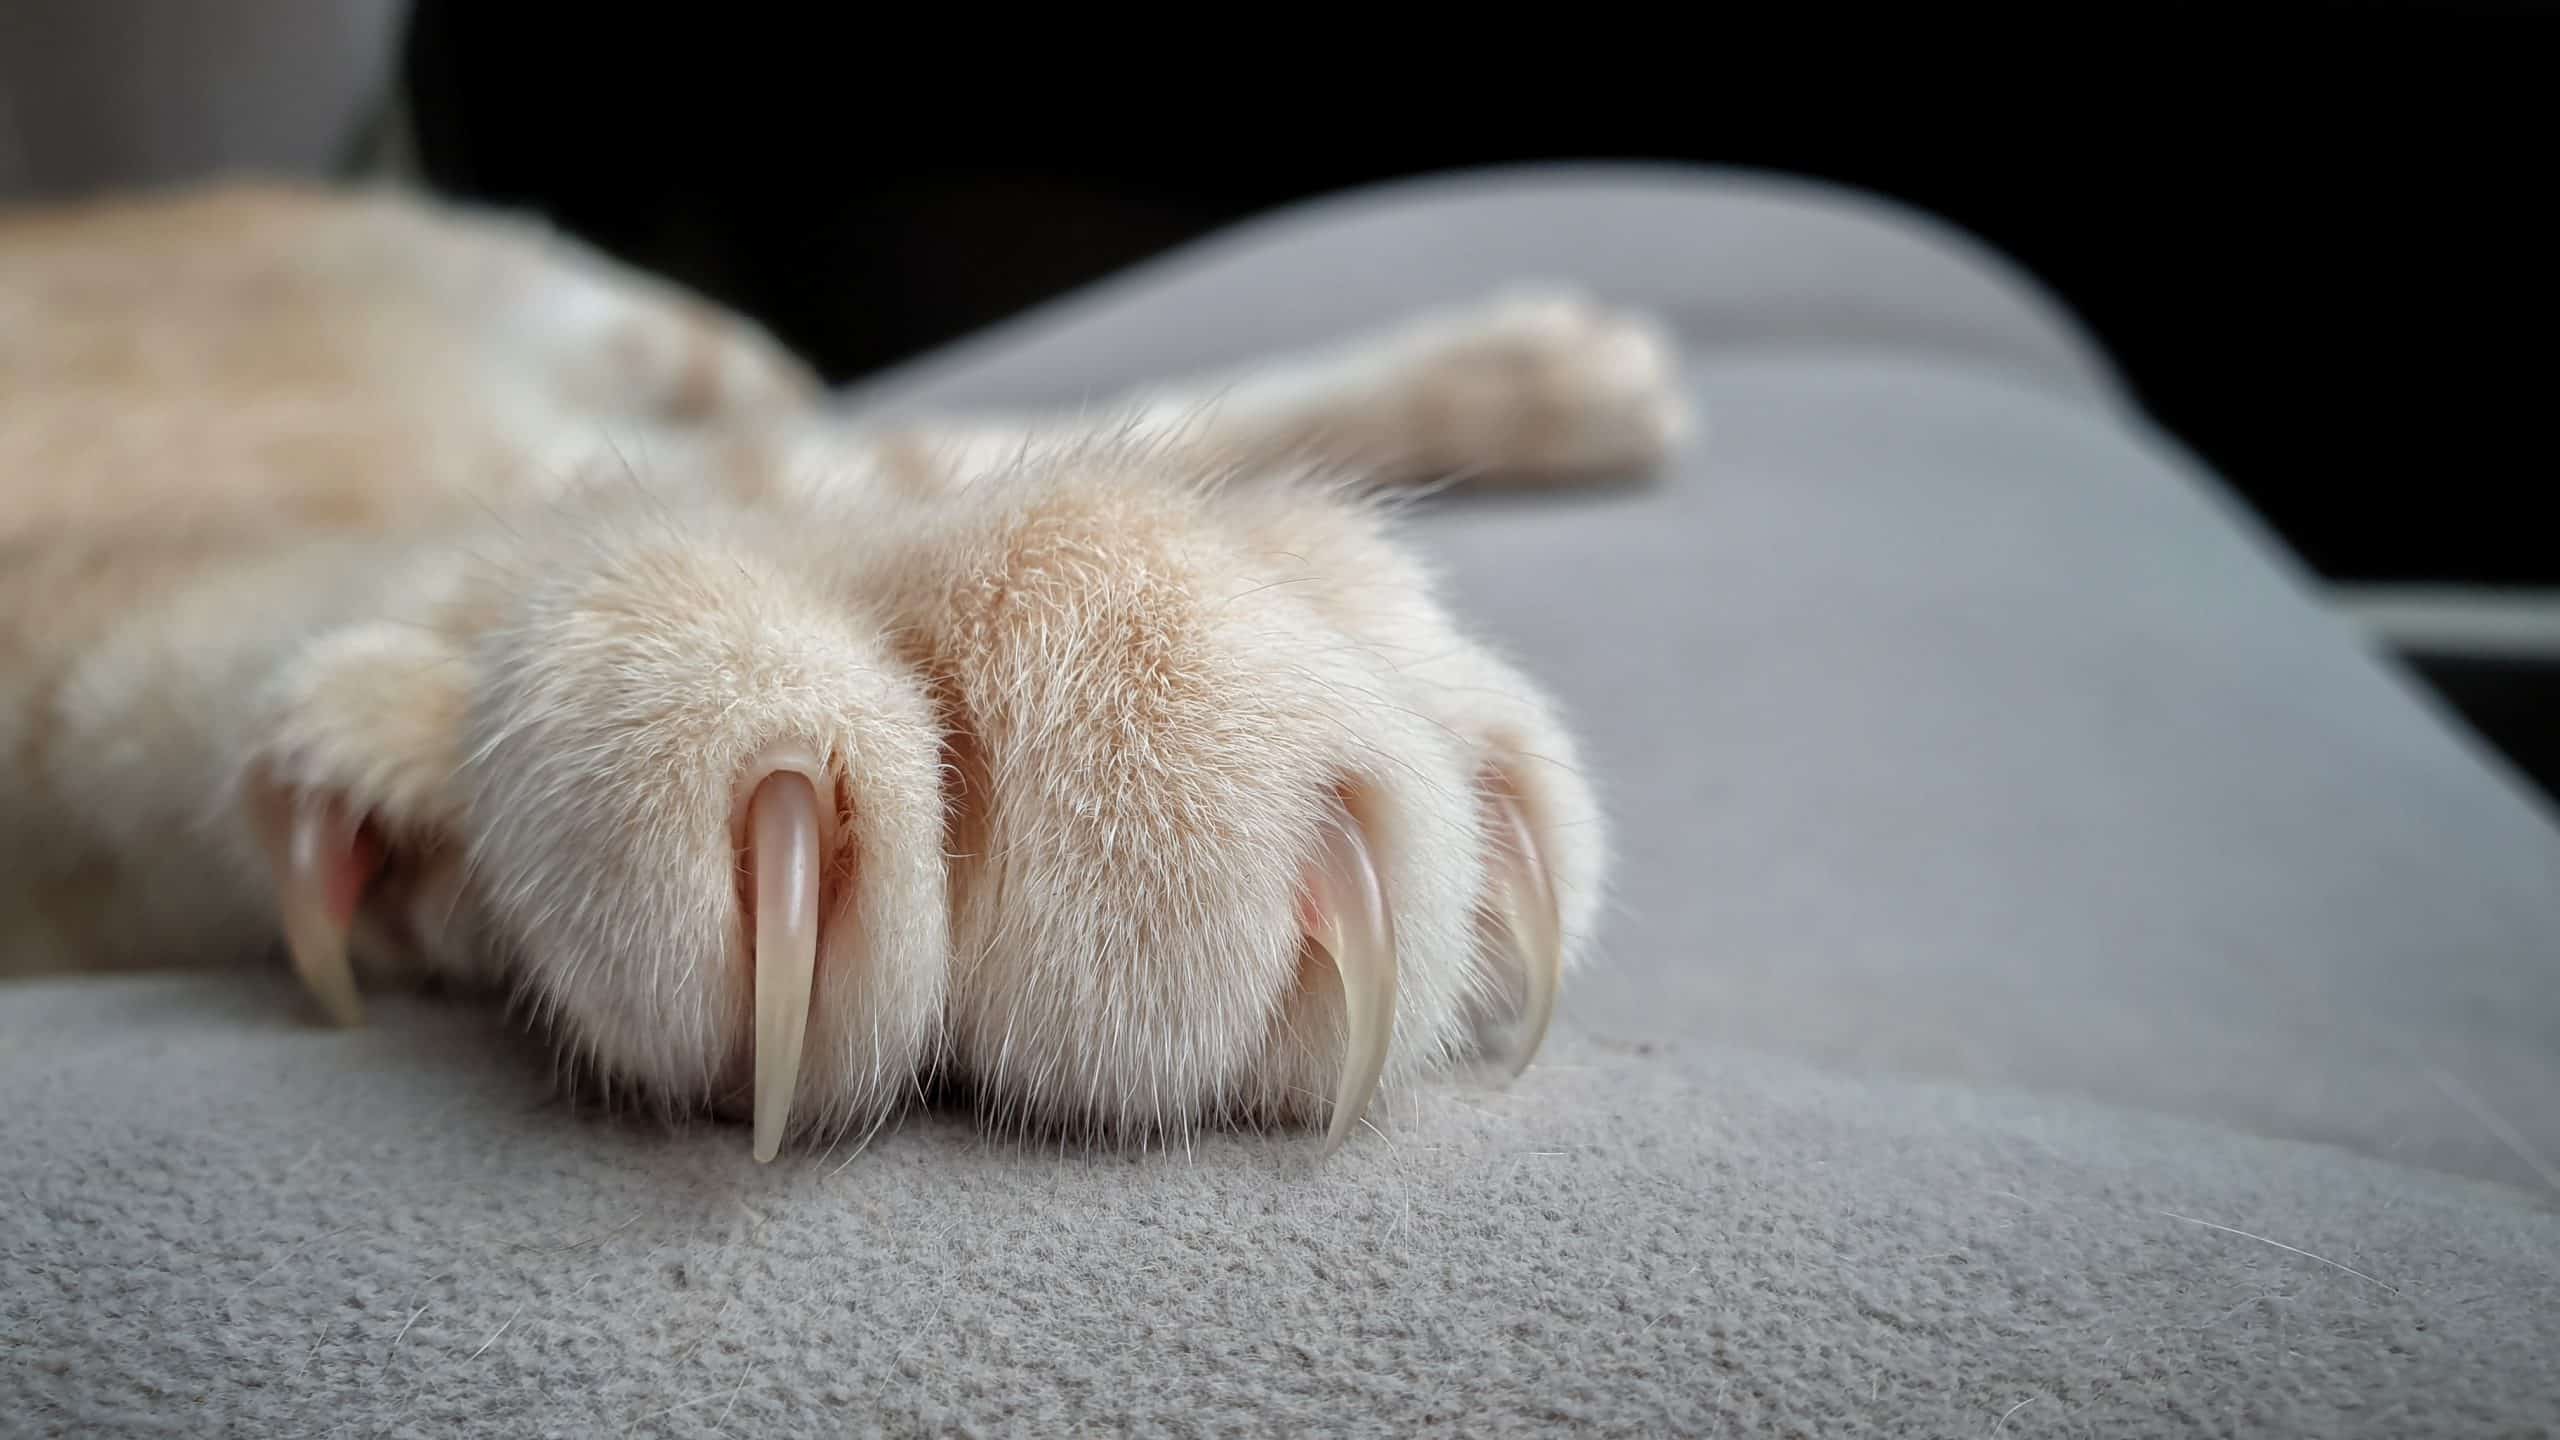 cat's paws with long and sharp claws on fabric sofa